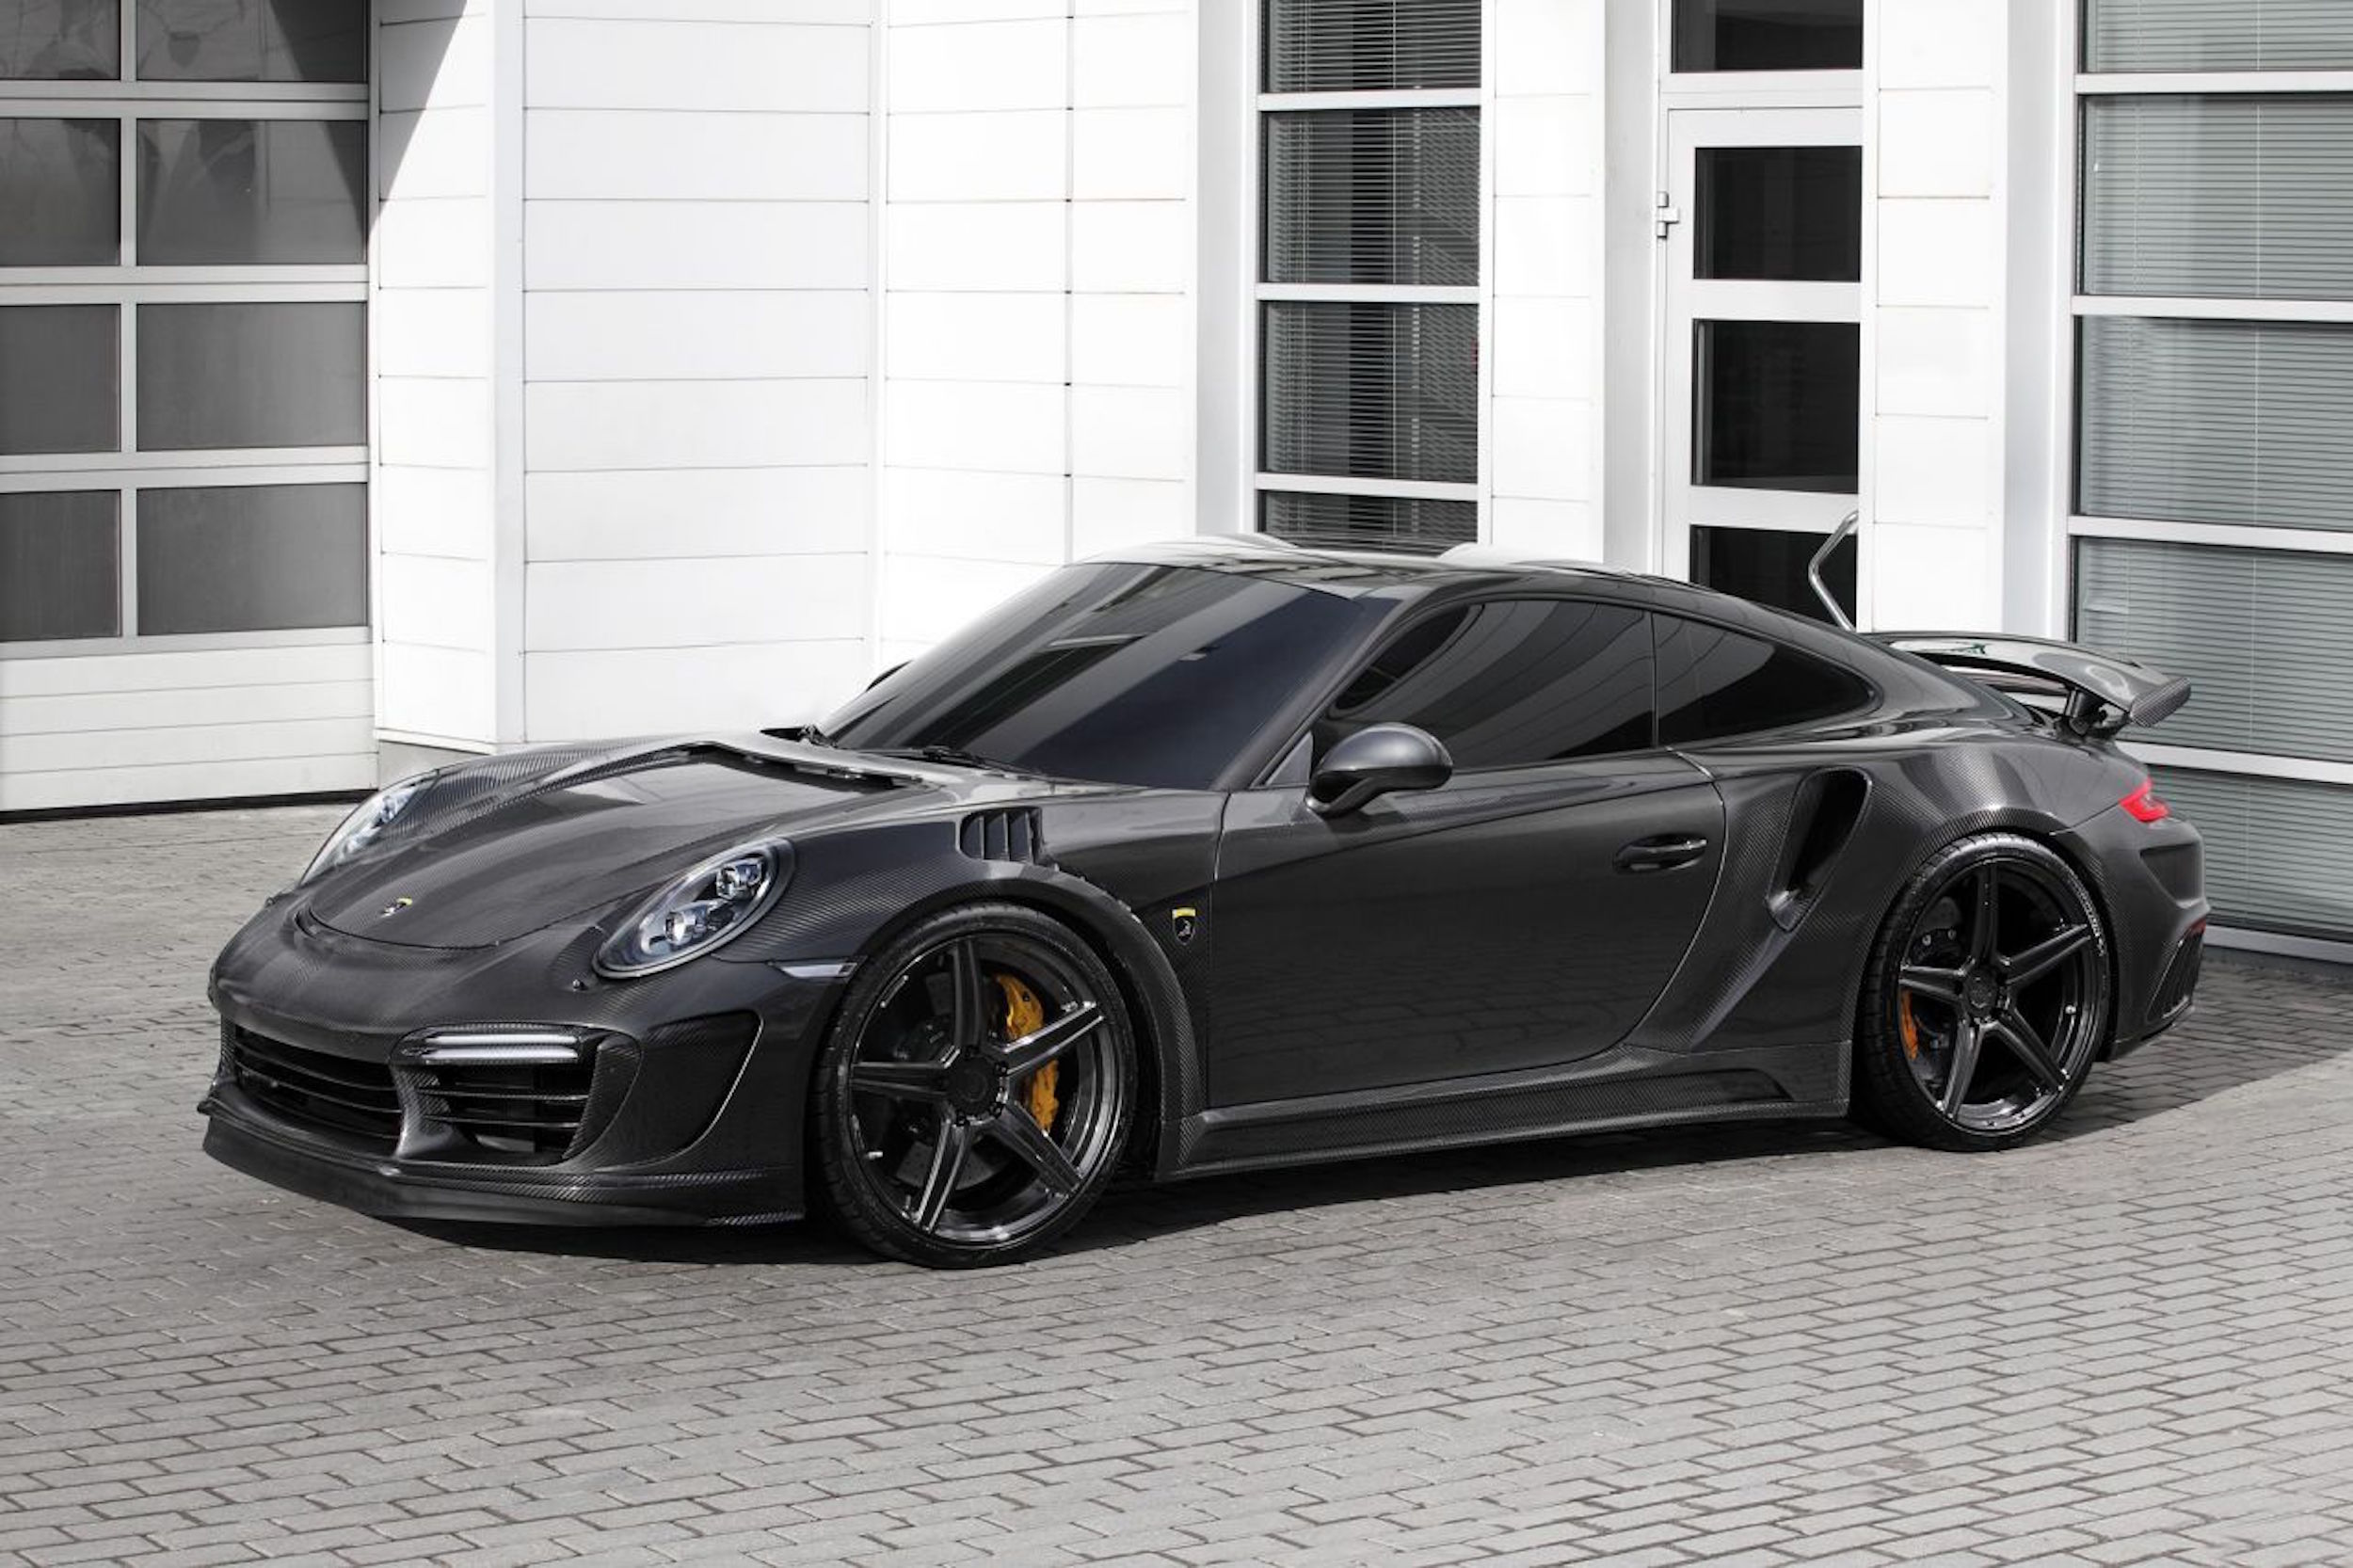 TopCar Dresses Their Tuned Porsche 911 Turbo S In Brown Carbon